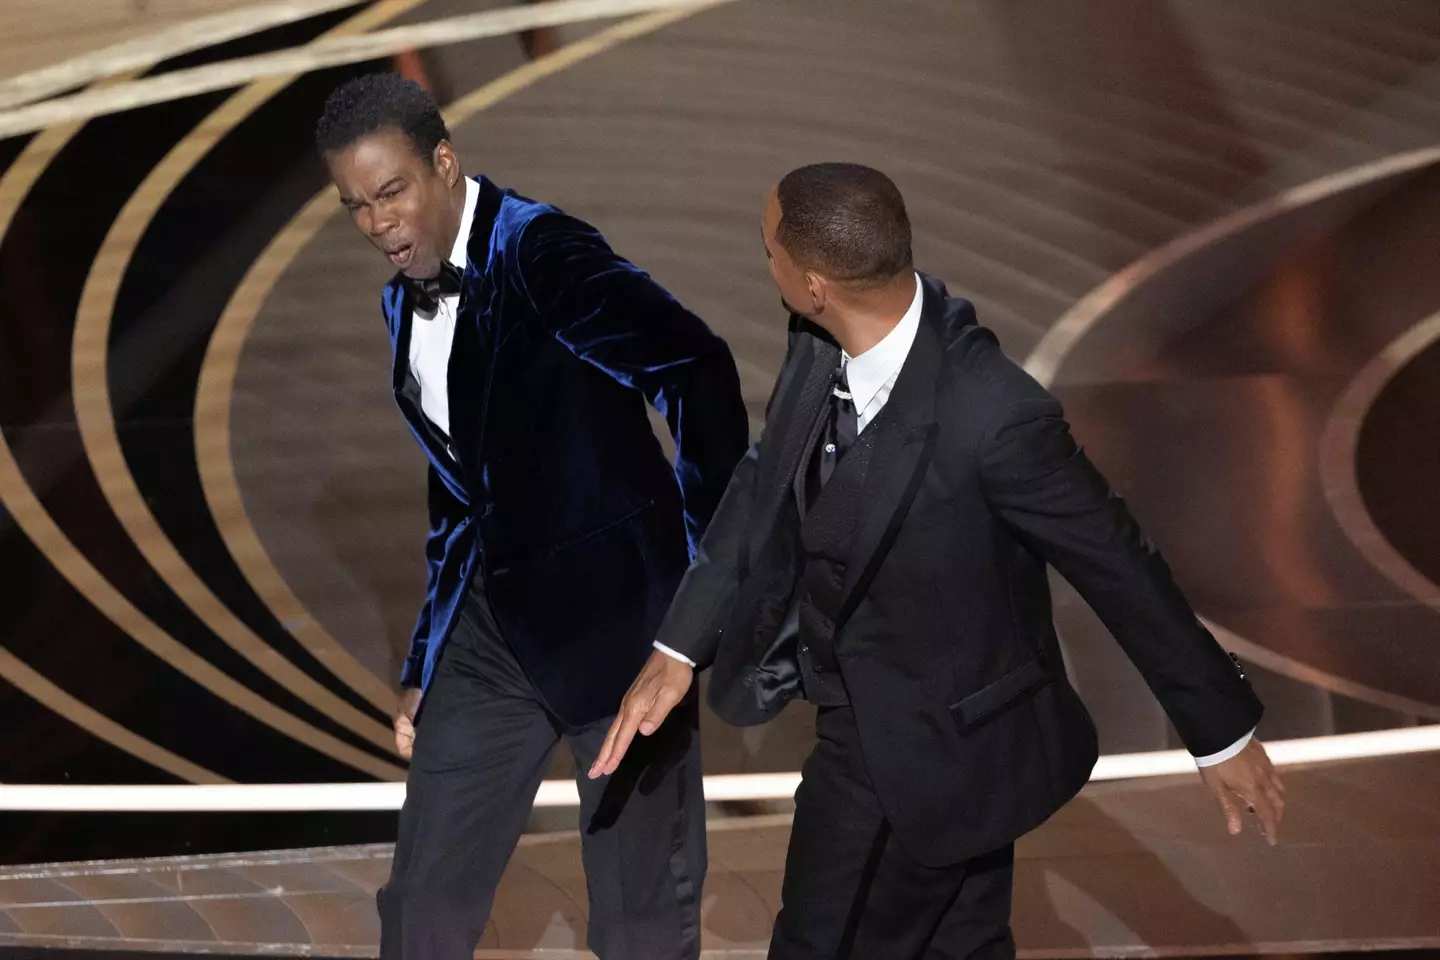 Chris Rock has addressed the Oscars incident.